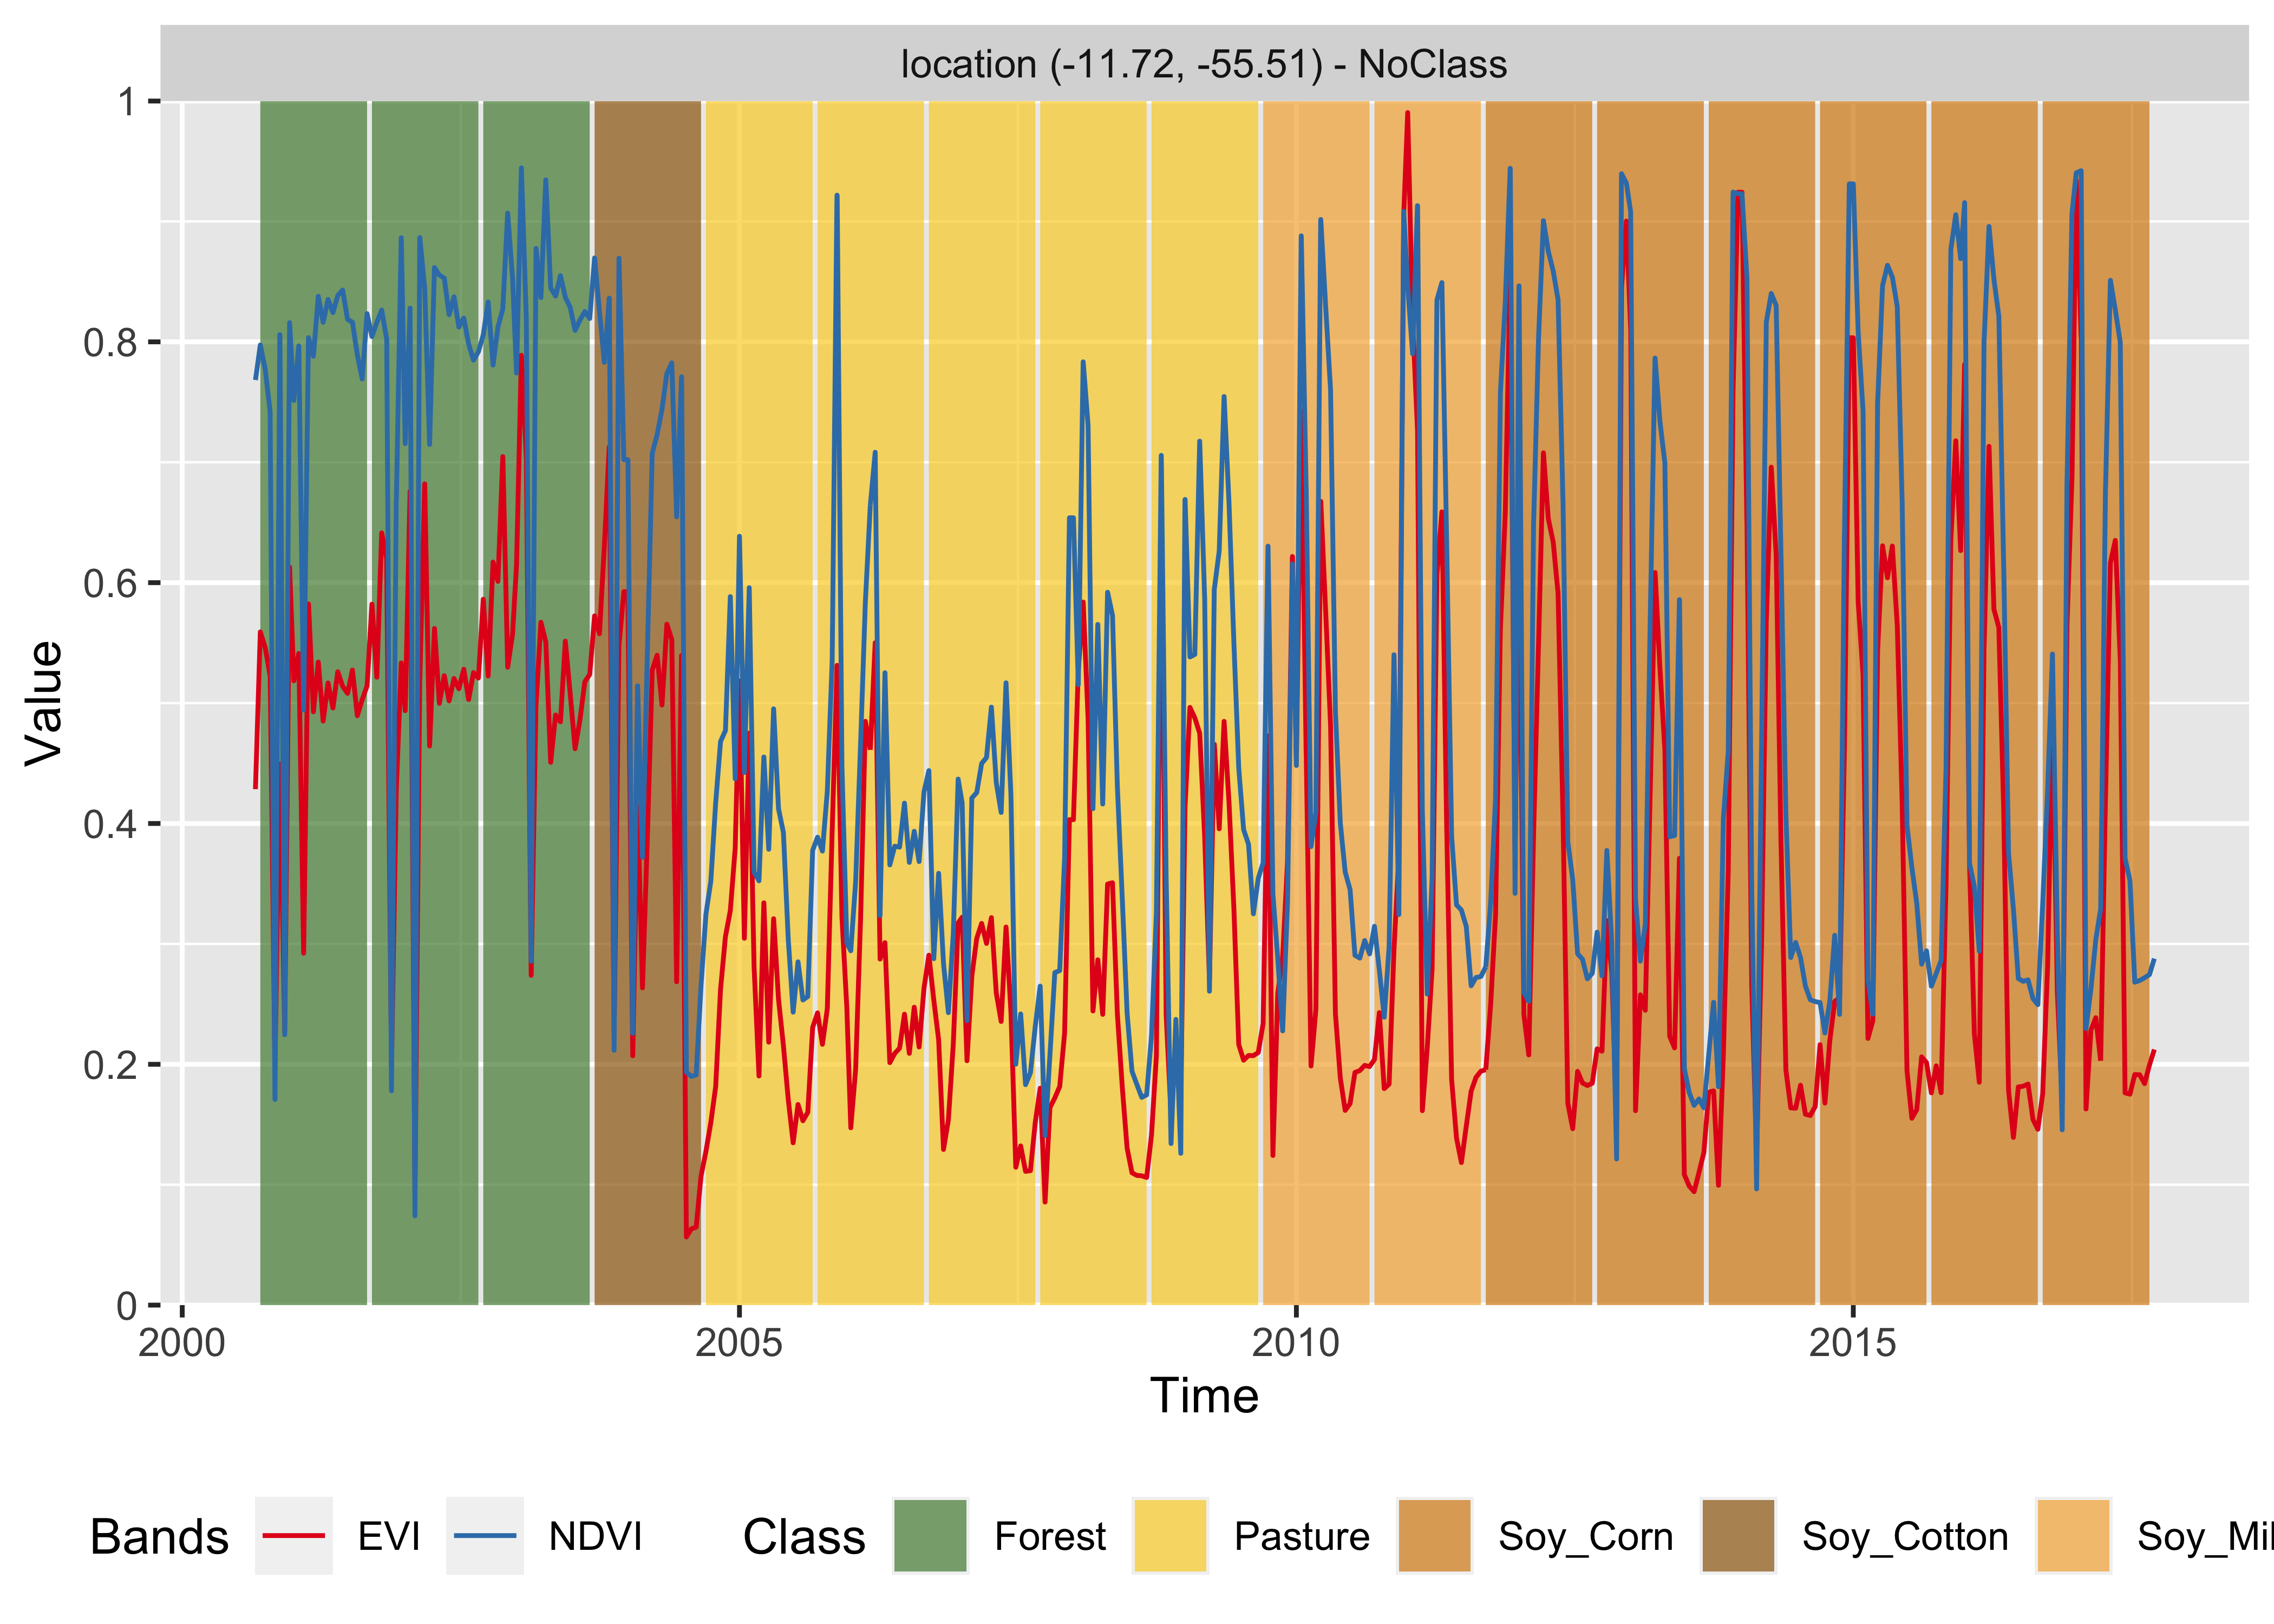 Classification of time series using ResNet (Source: Authors).